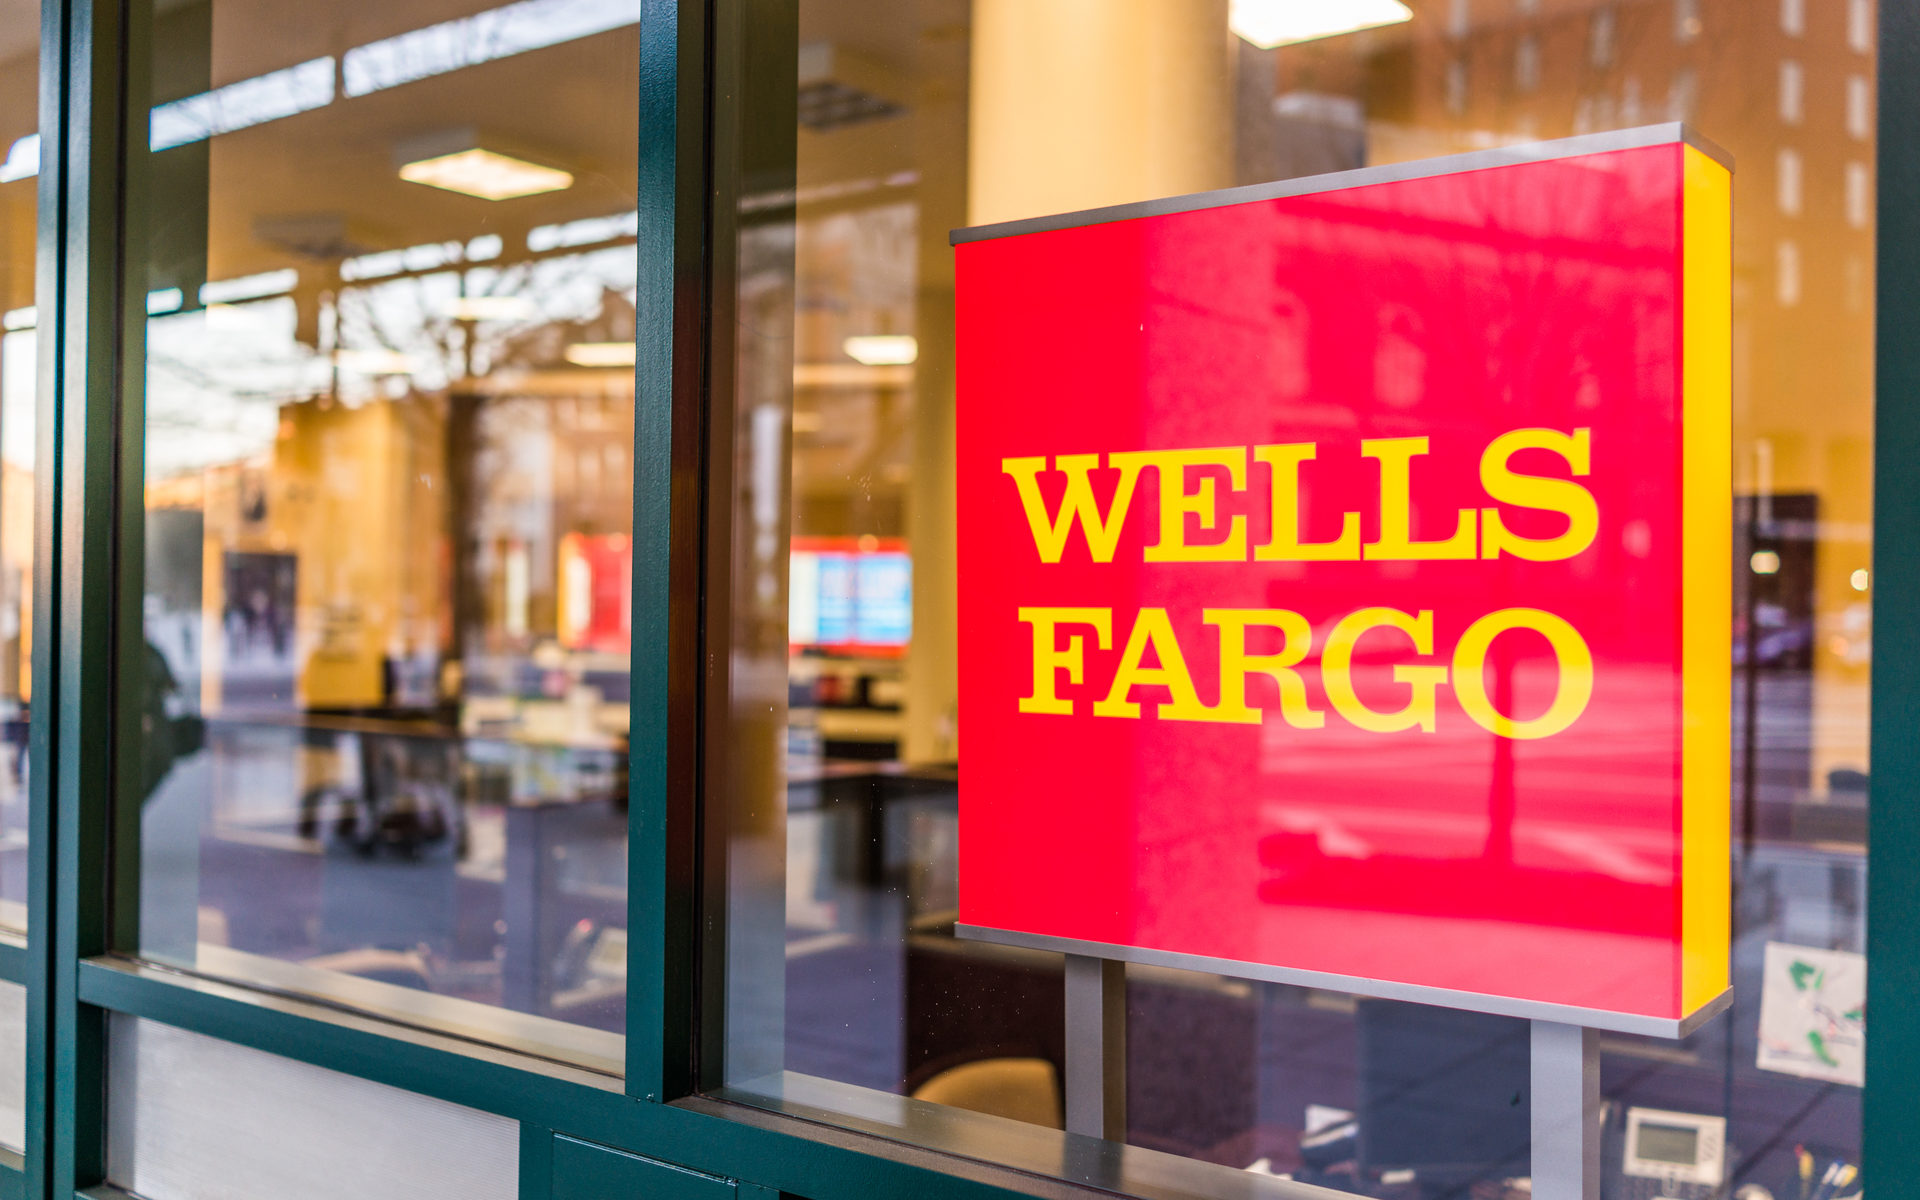 Buy crypto with wells fargo bitcoin is immoral